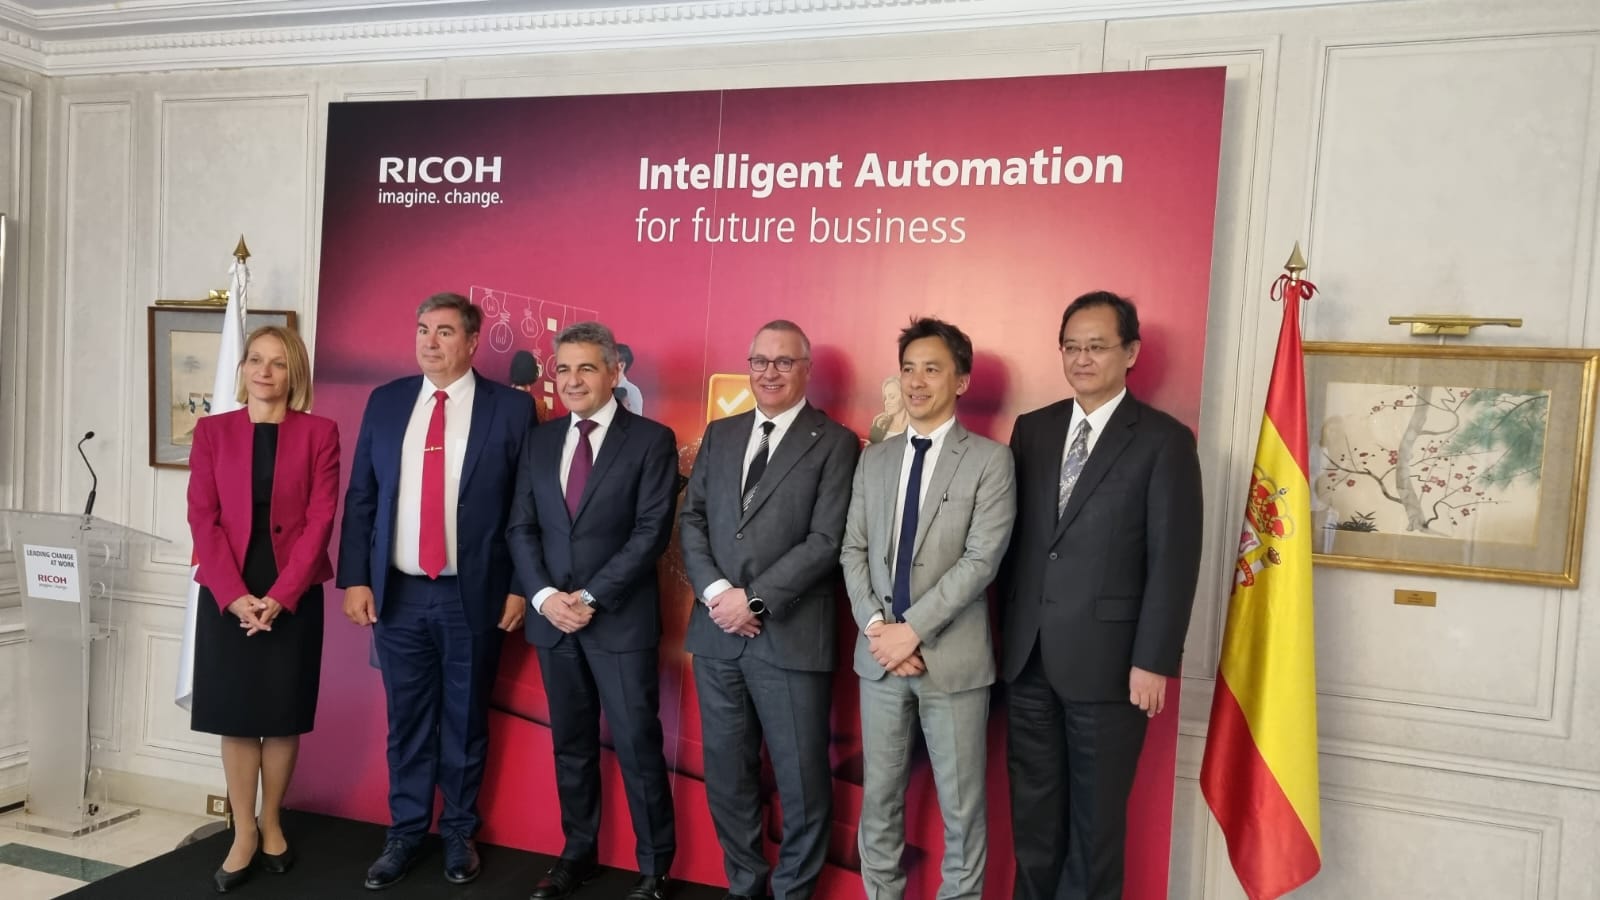 Ricoh presents the recent acquisition of PFU and its new Hyperatumation Factory for all of Europe